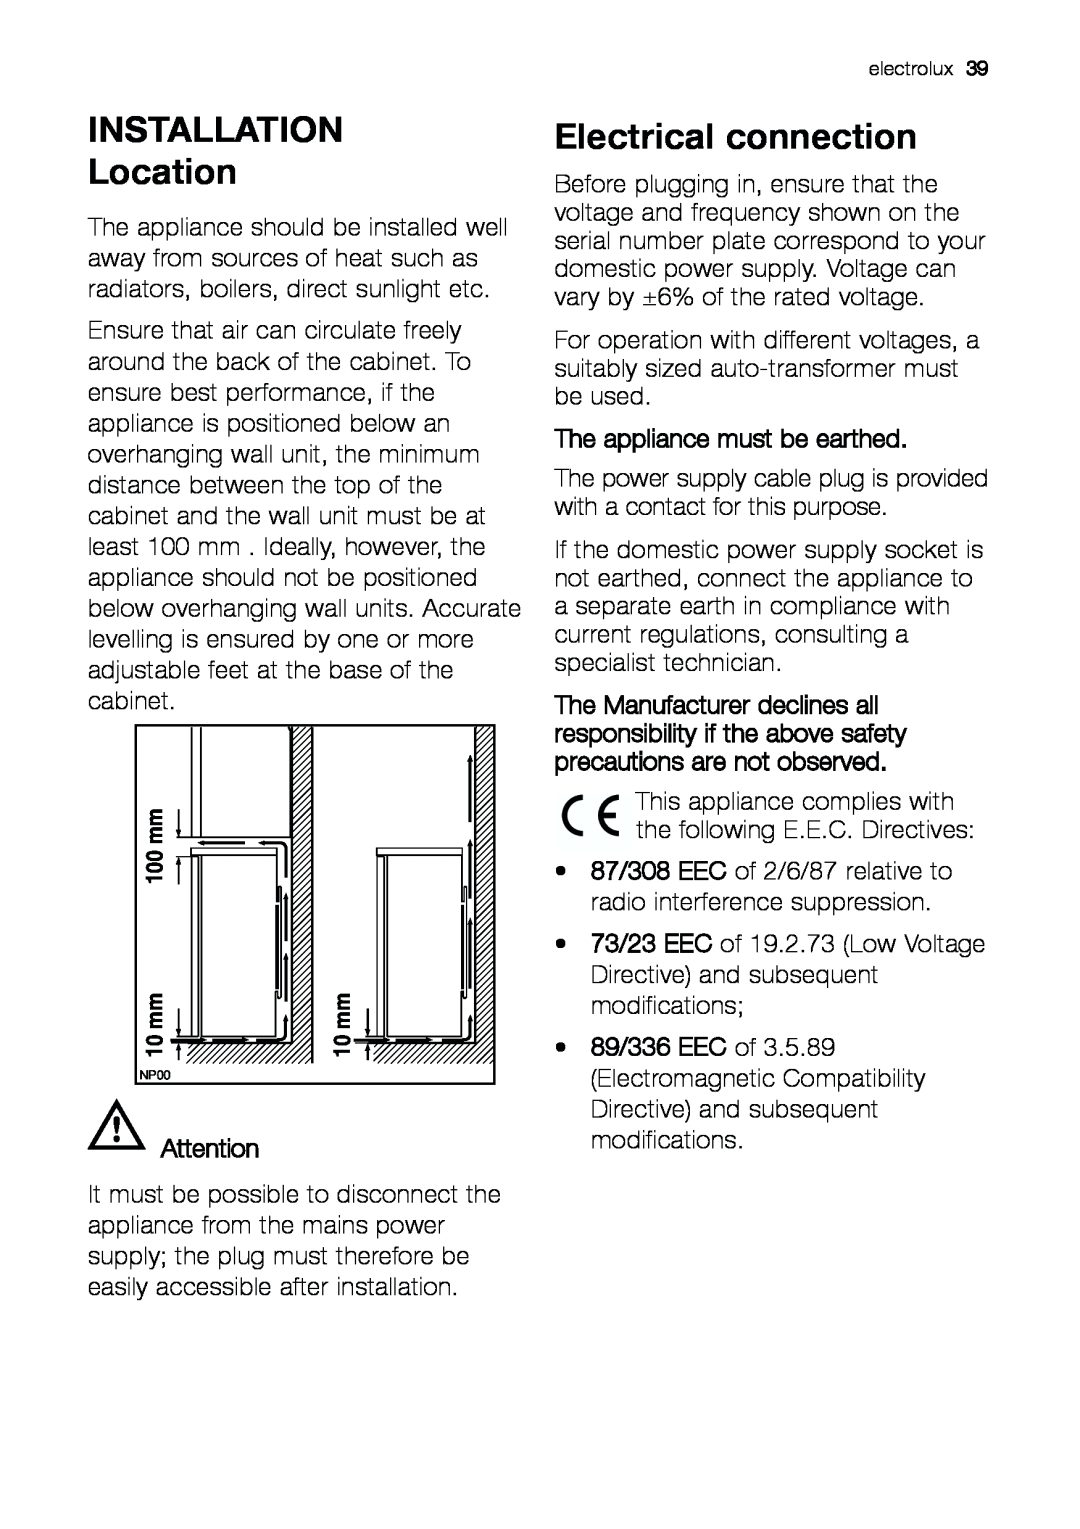 Electrolux EUF 27391 S manual INSTALLATION Location, Electrical connection, The appliance must be earthed 